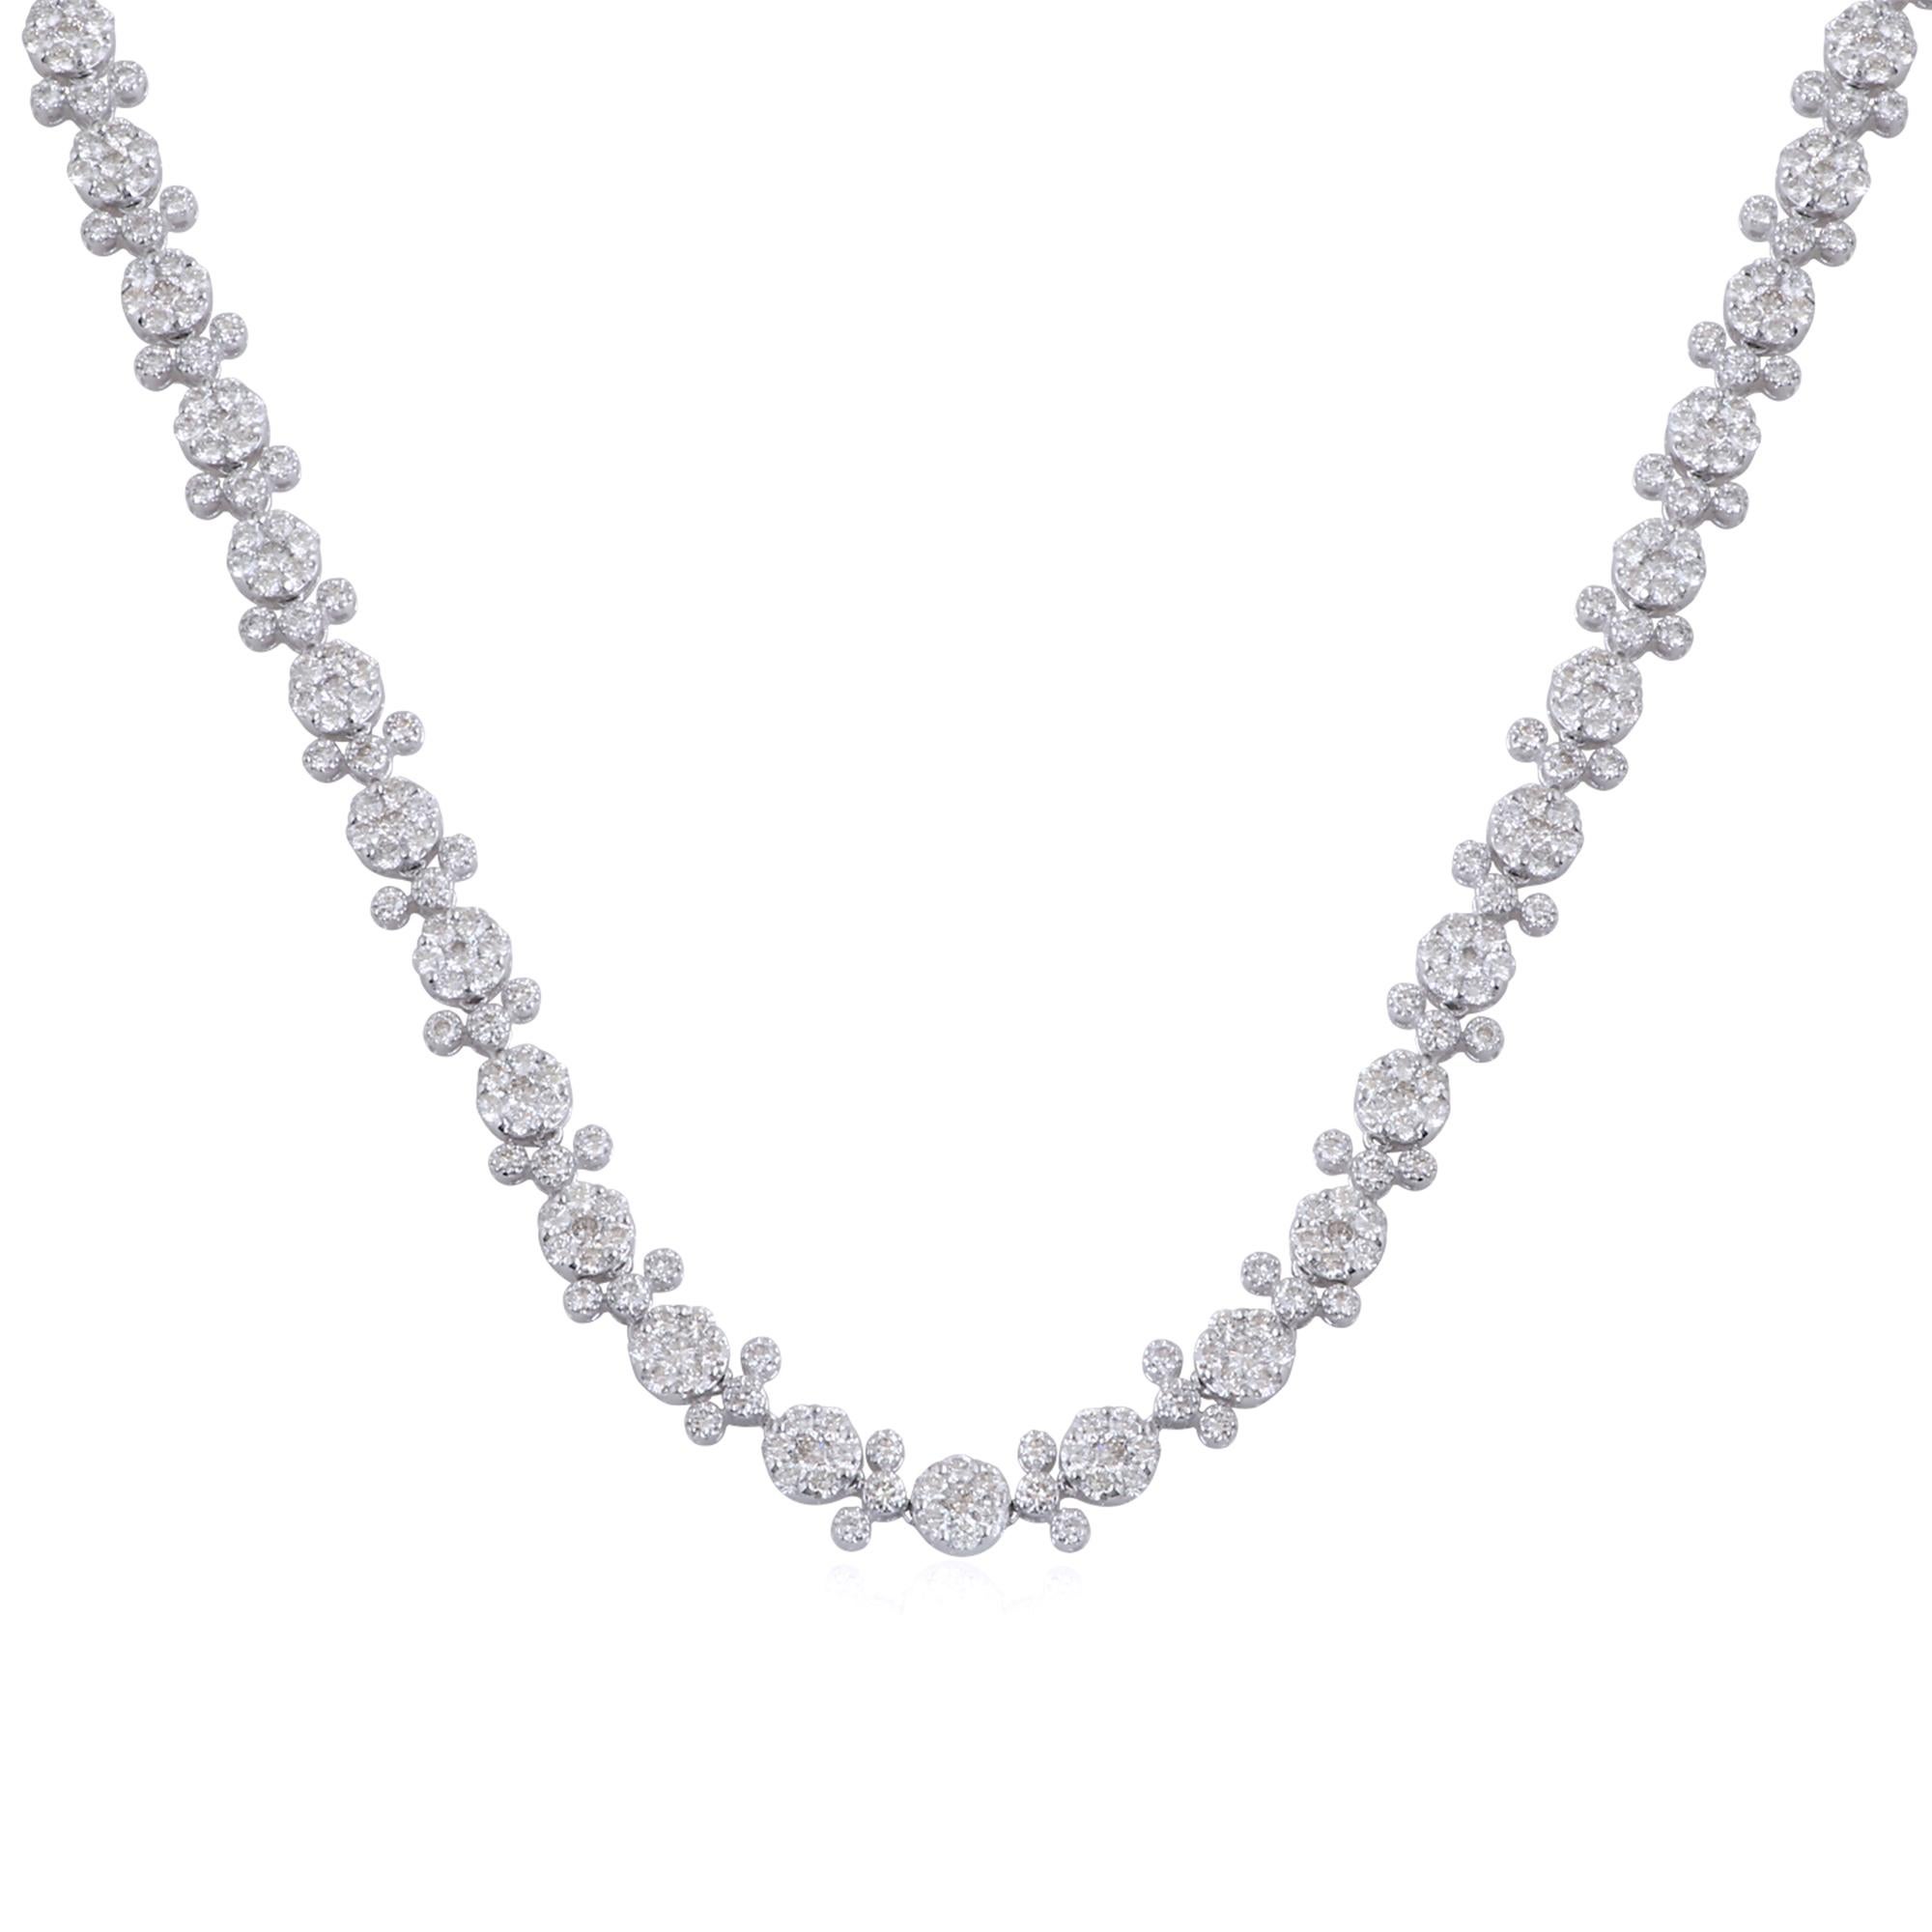 Make a bold and captivating statement with this extraordinary 20.50 Carat SI/HI Diamond Necklace. Handmade with meticulous attention to detail, this exquisite piece of fine jewelry showcases the unparalleled beauty and brilliance of diamonds, set in